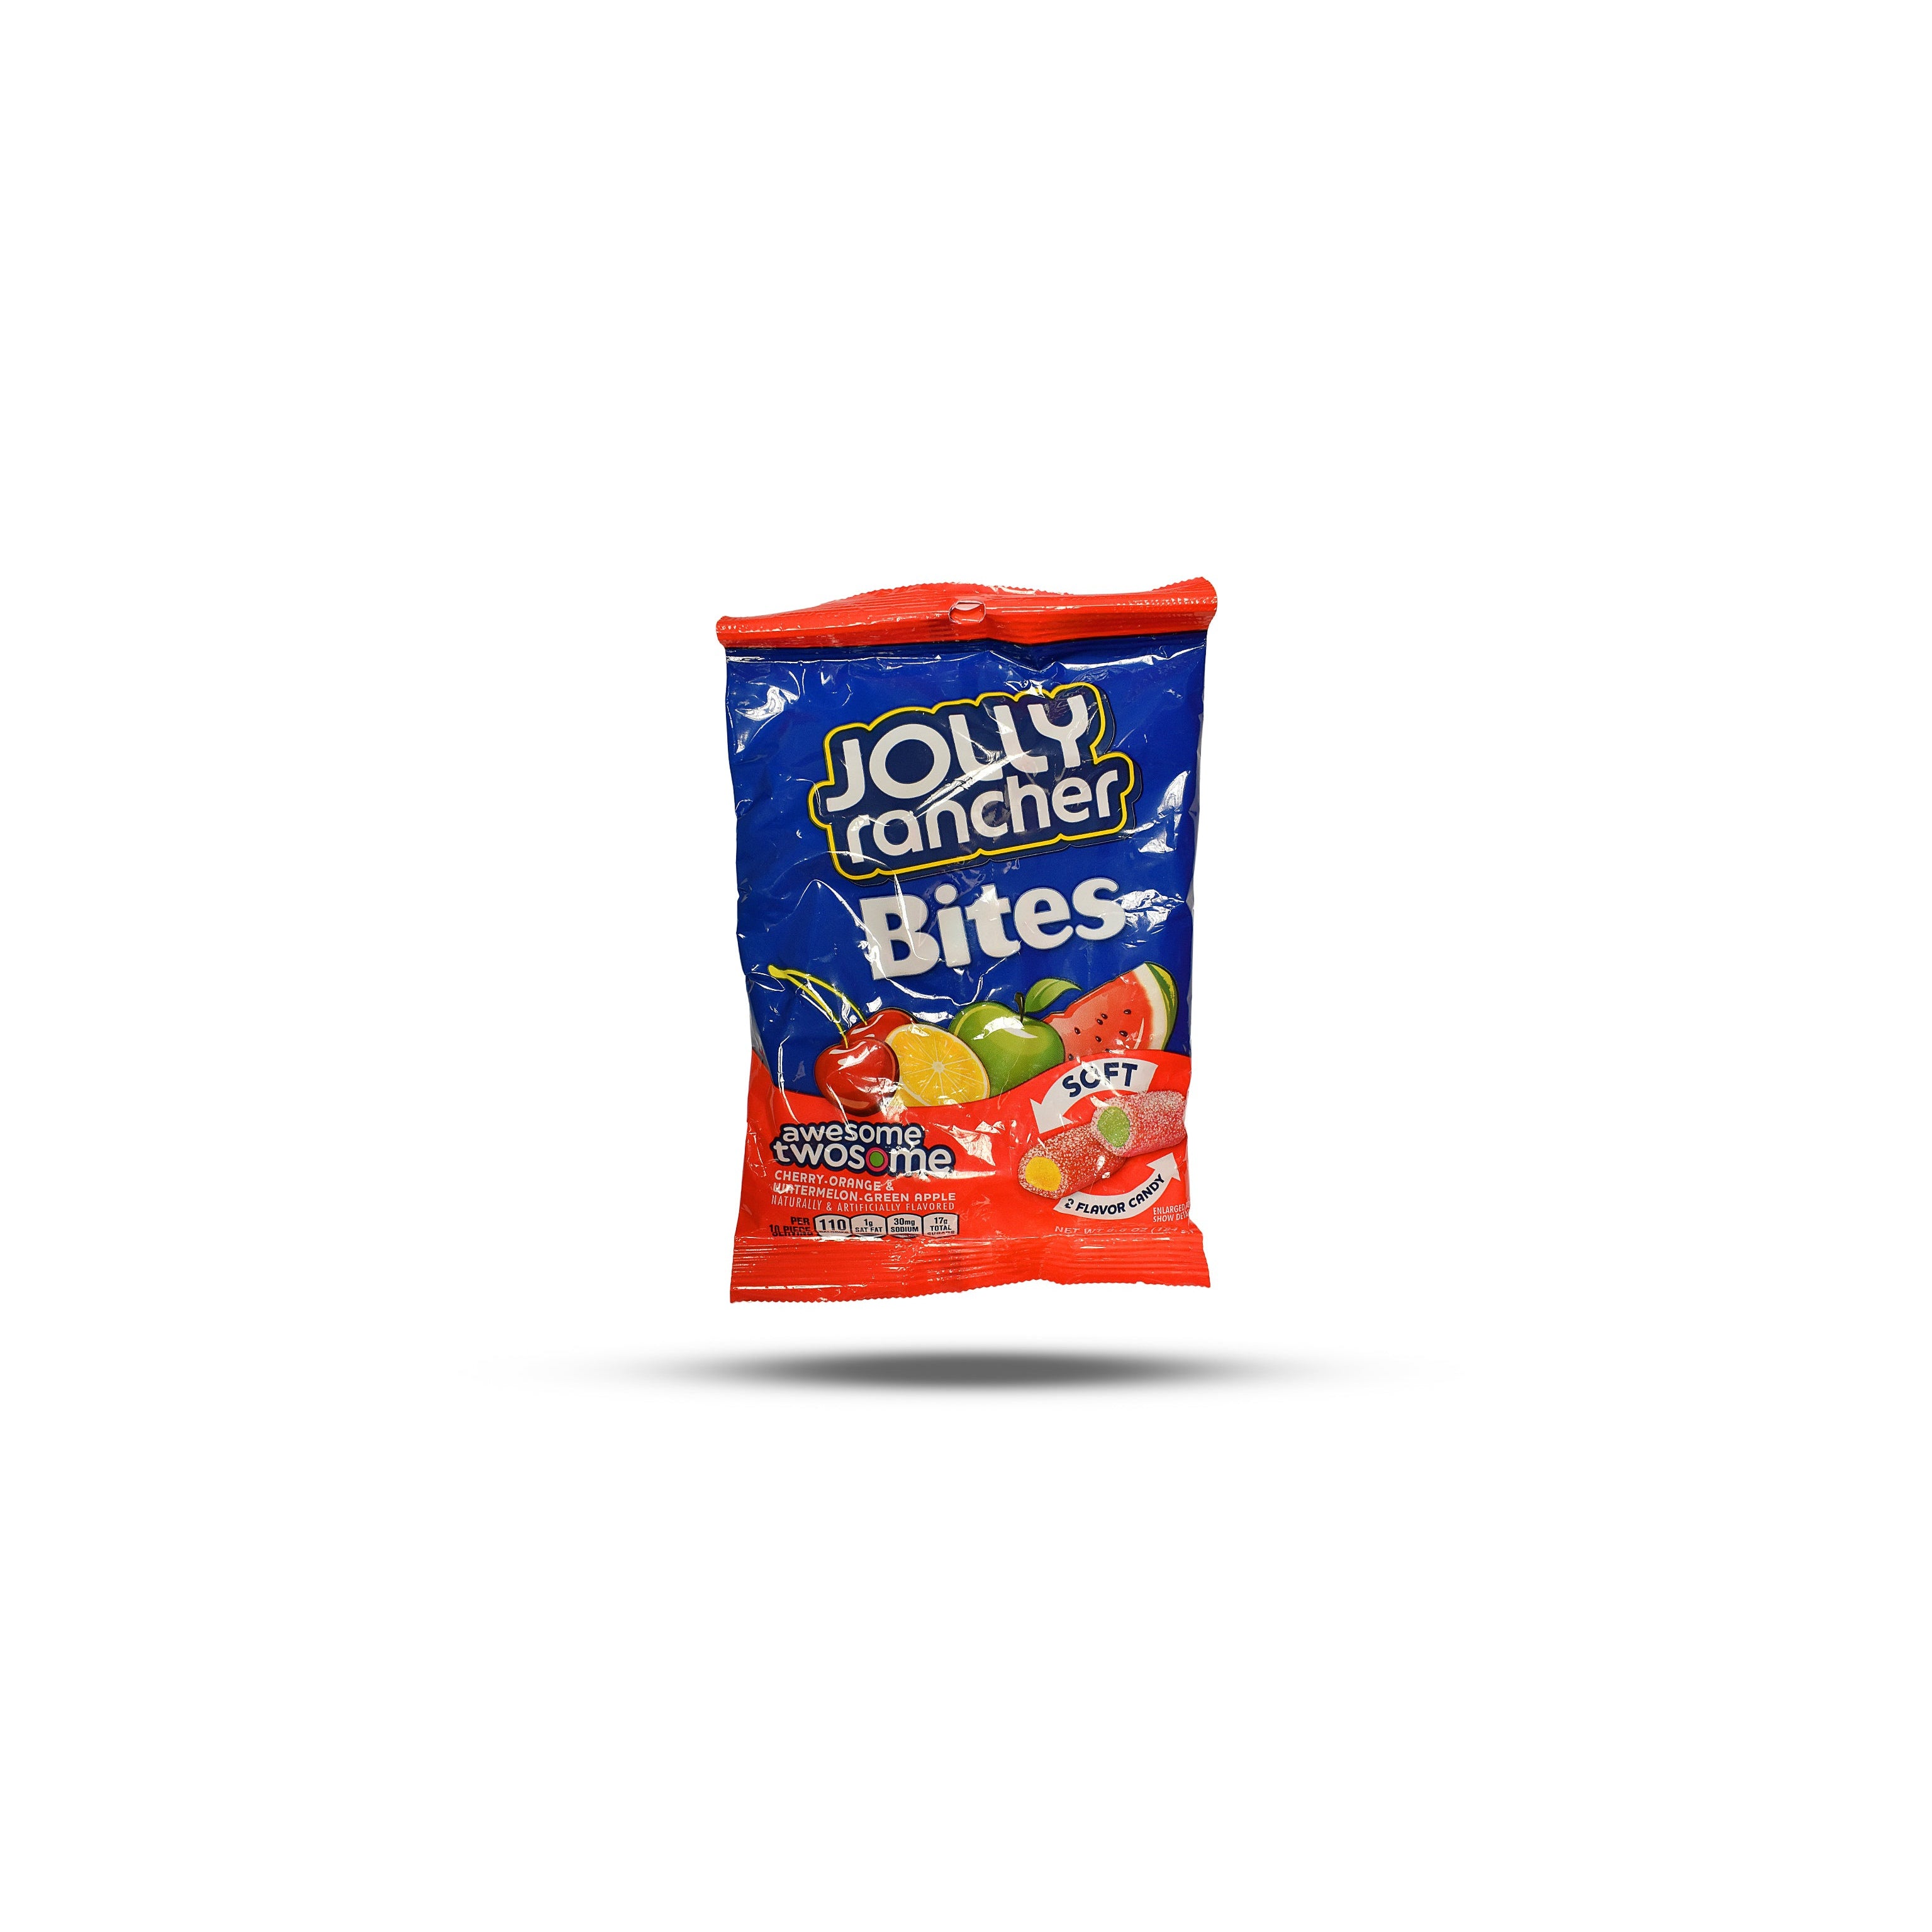 Jolly Rancher Bites awesome twosome 184g-The Hershey Company-SNACK SHOP AUSTRIA